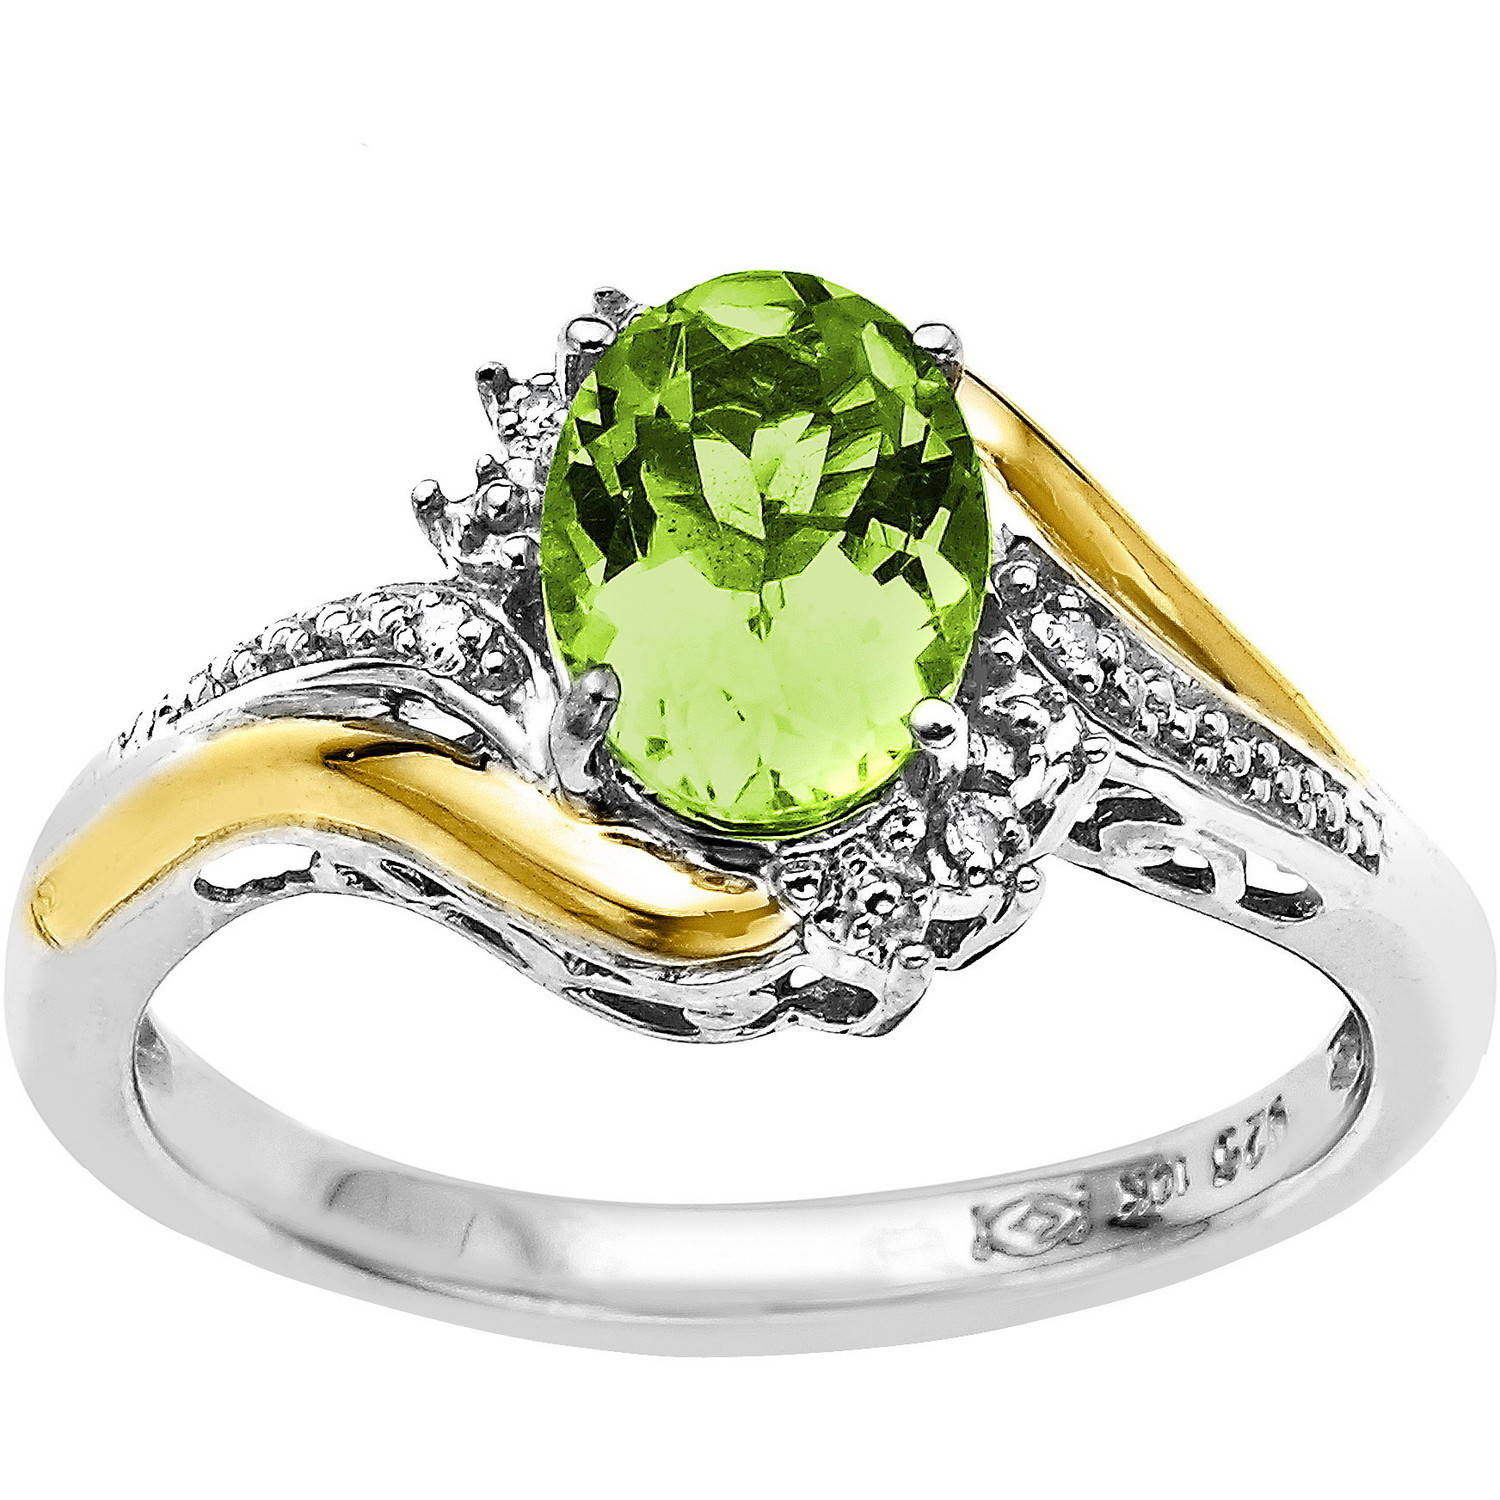 Sterling Silver 8X6 MM Oval Cut Peridot Ladies Solitaire Bridal Engagement Ring